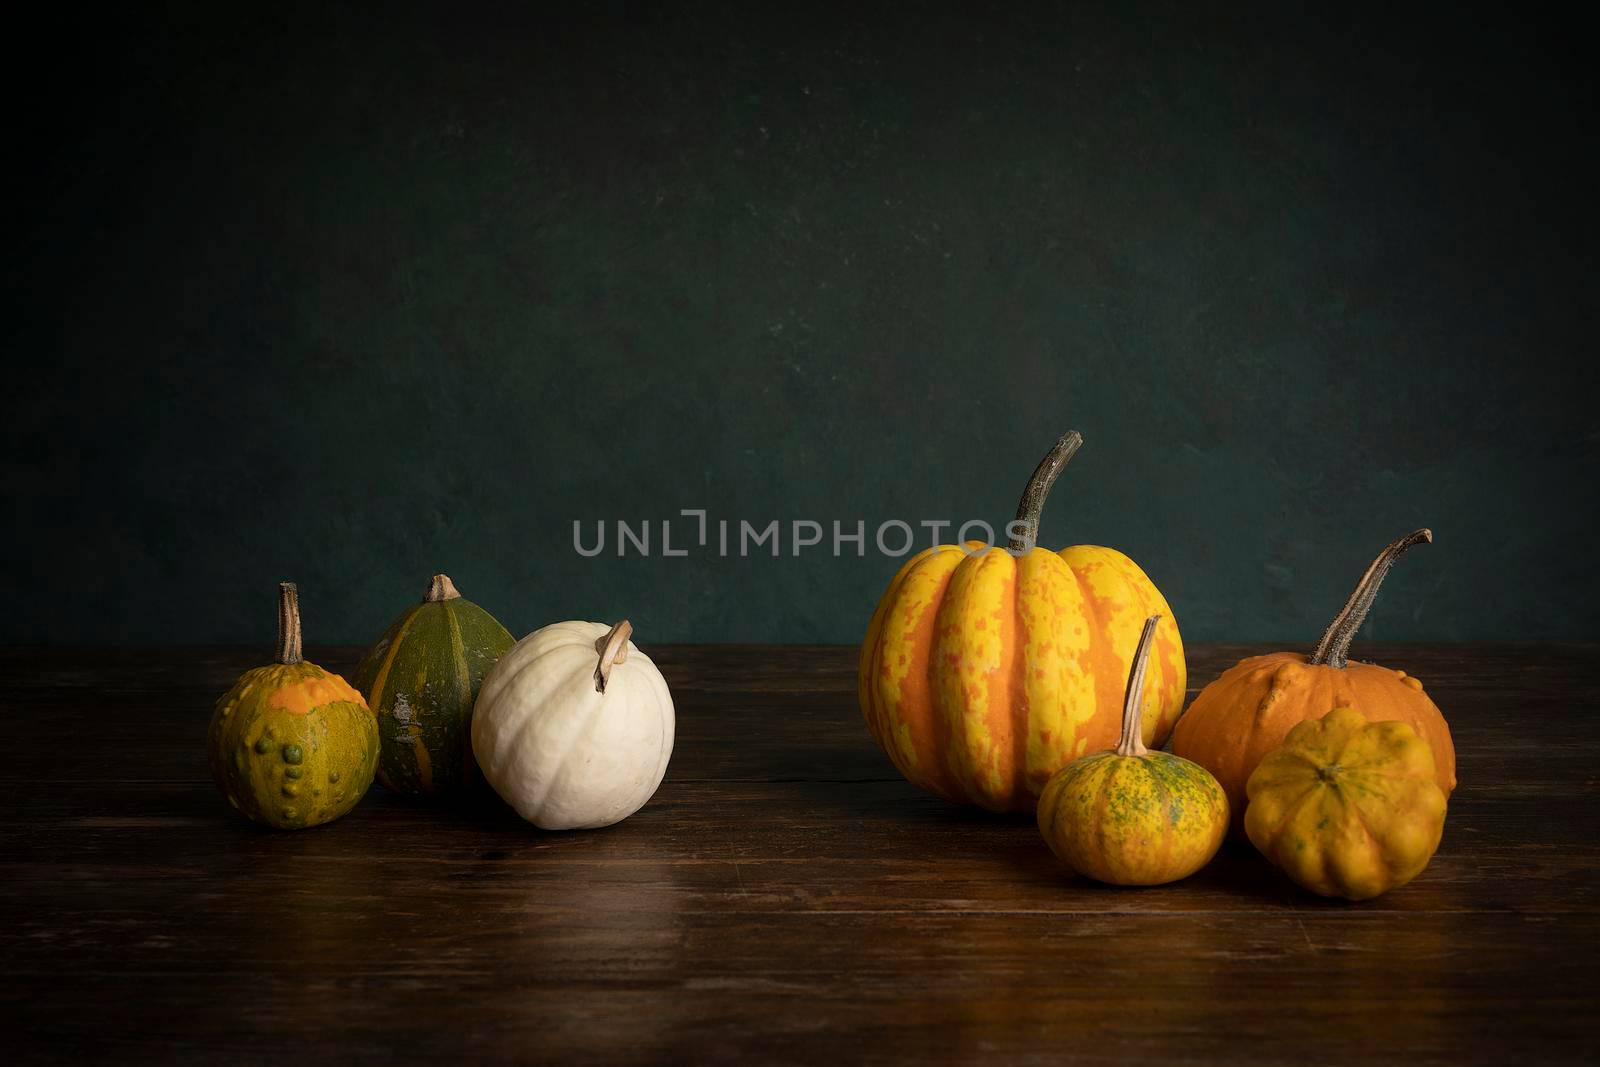 Still life scene with orange and green pupkins or squash for halloween by LeoniekvanderVliet